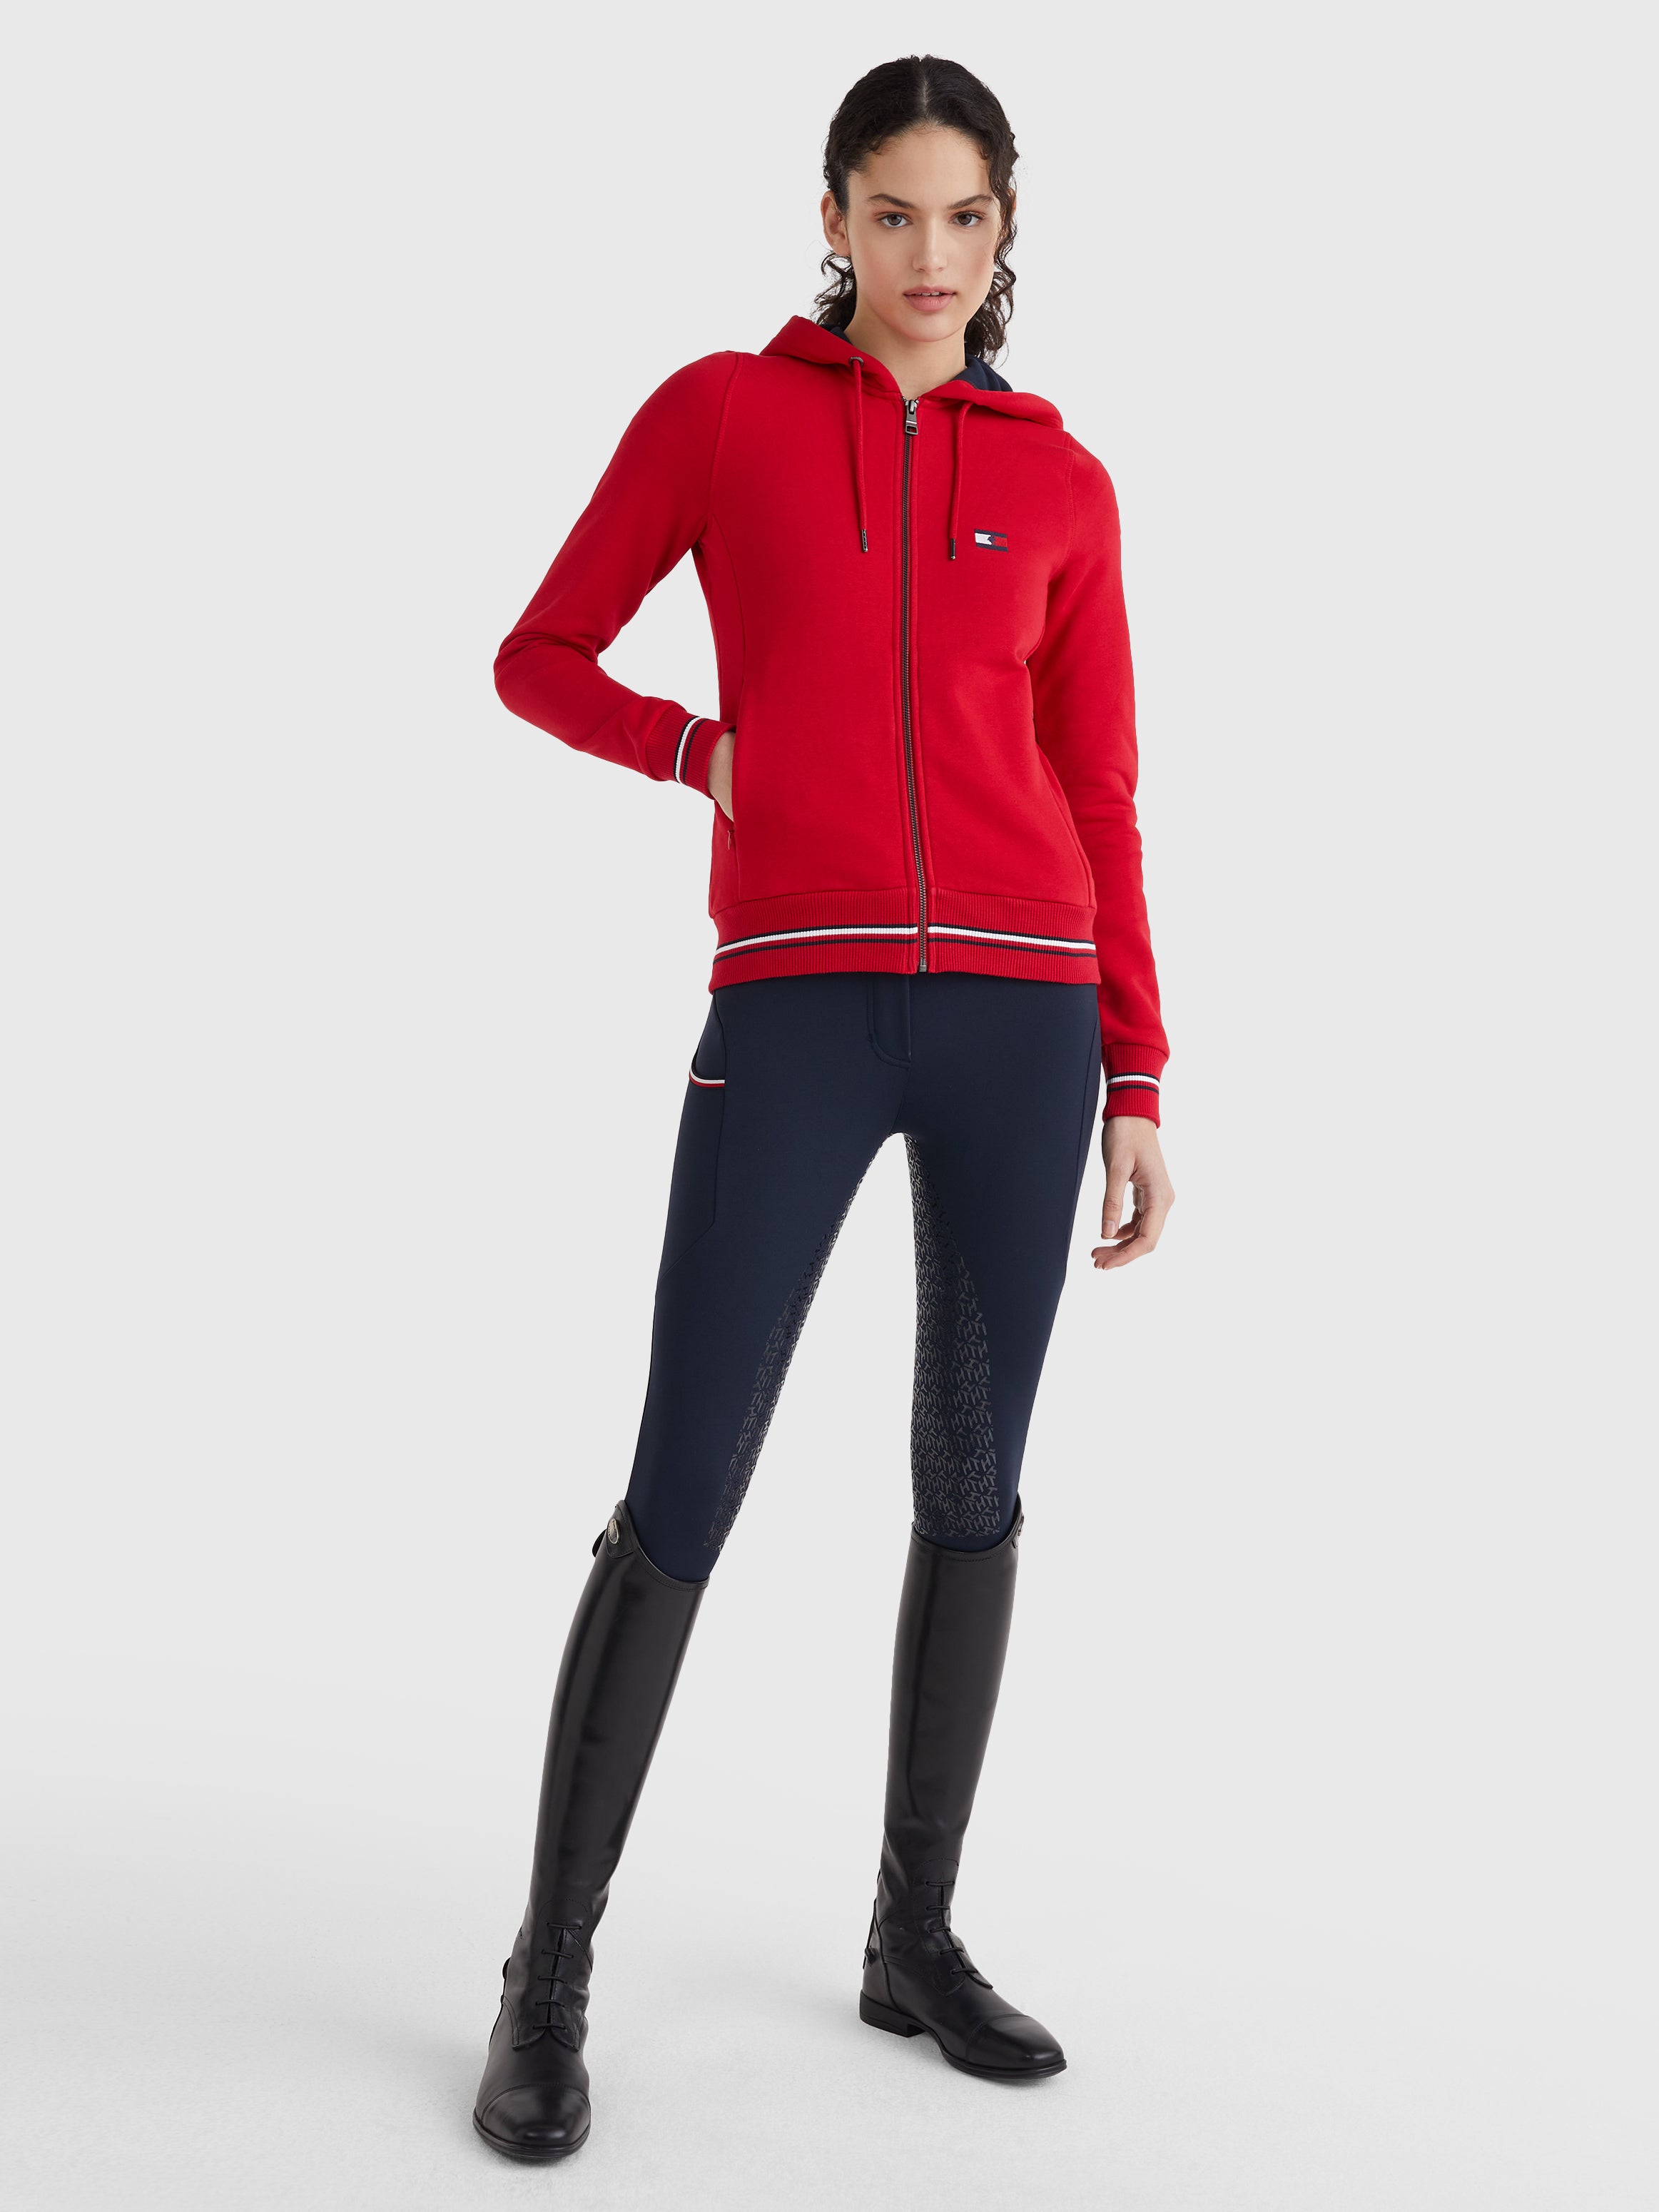 Tommy Hilfiger Sweat Jacket with Zipper Style - Primary Red